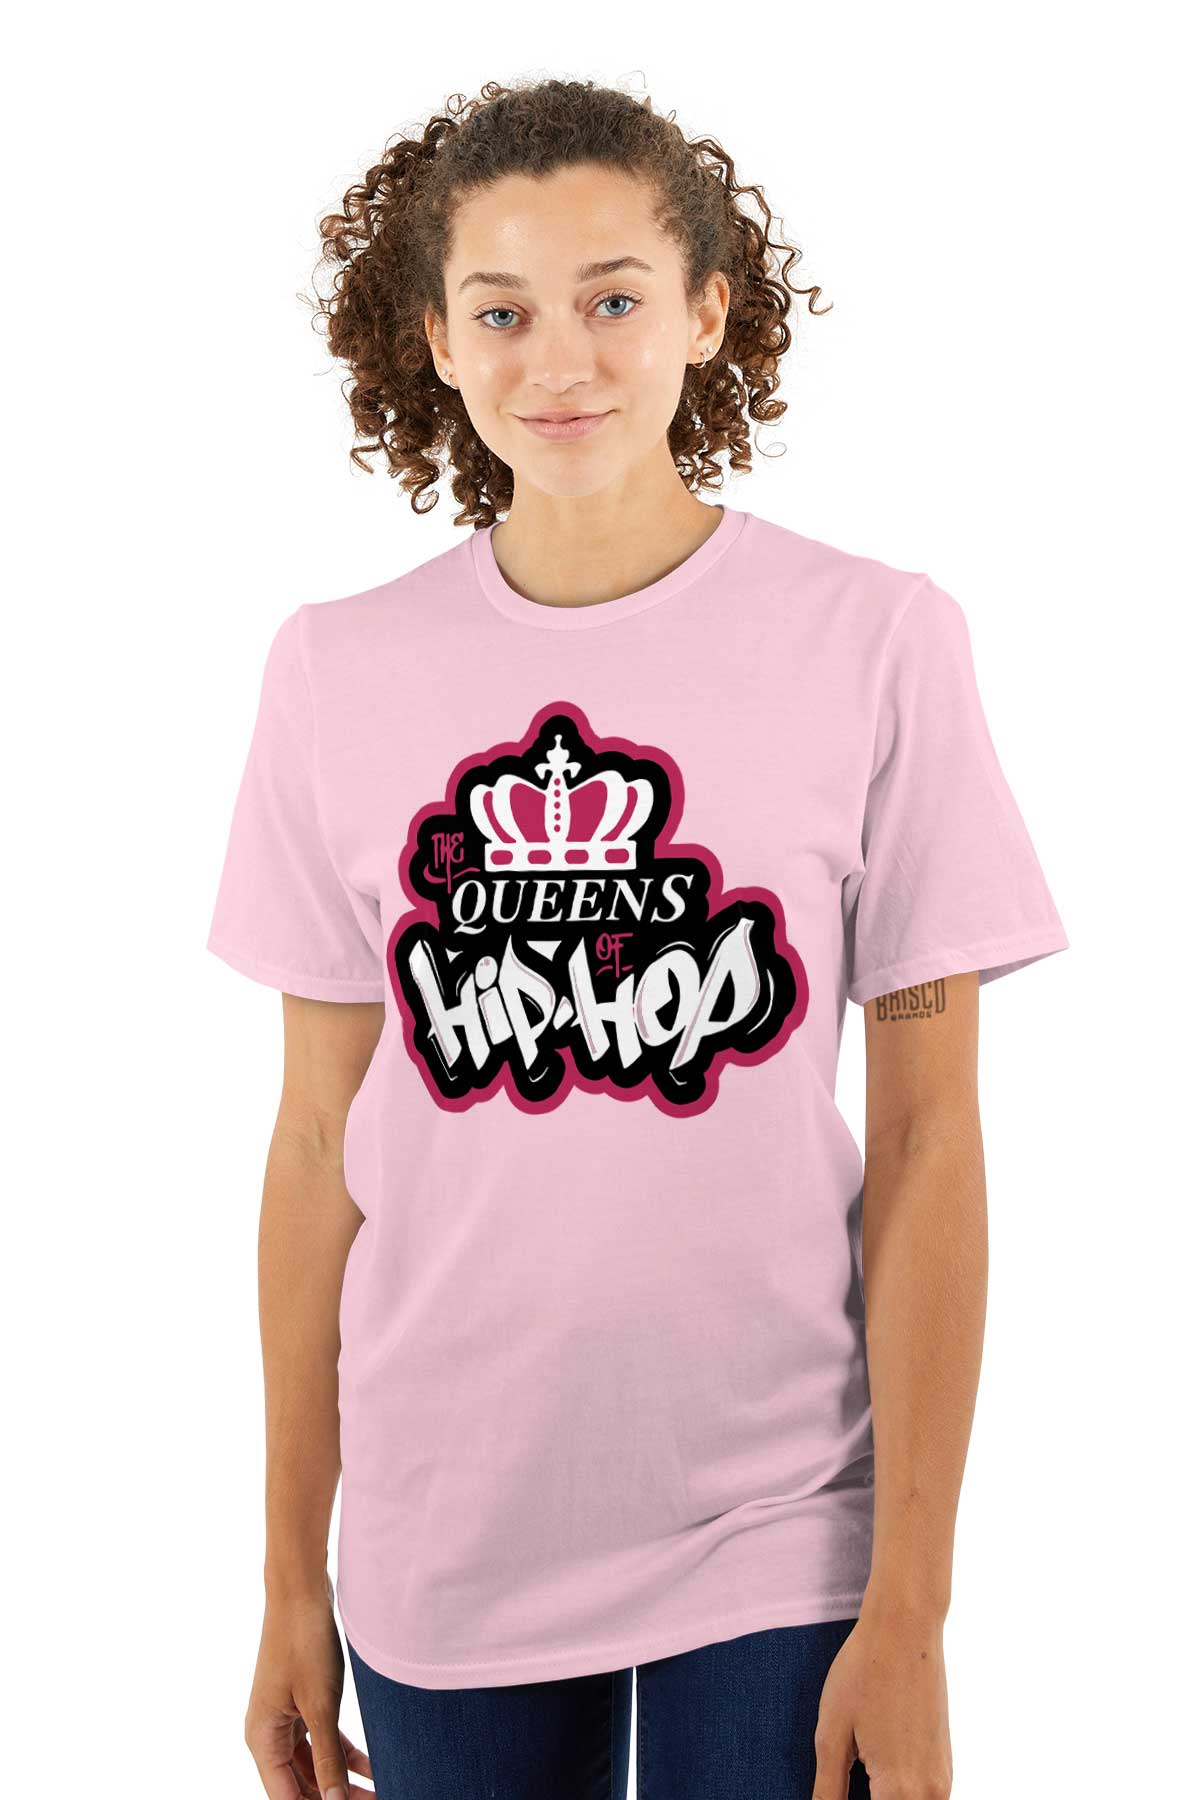 This streetwear design pays homage to influential female hip hop artists, with a graffiti-style logo of a crown in bold pink and white colors, symbolizing their confidence and vibrant energy.